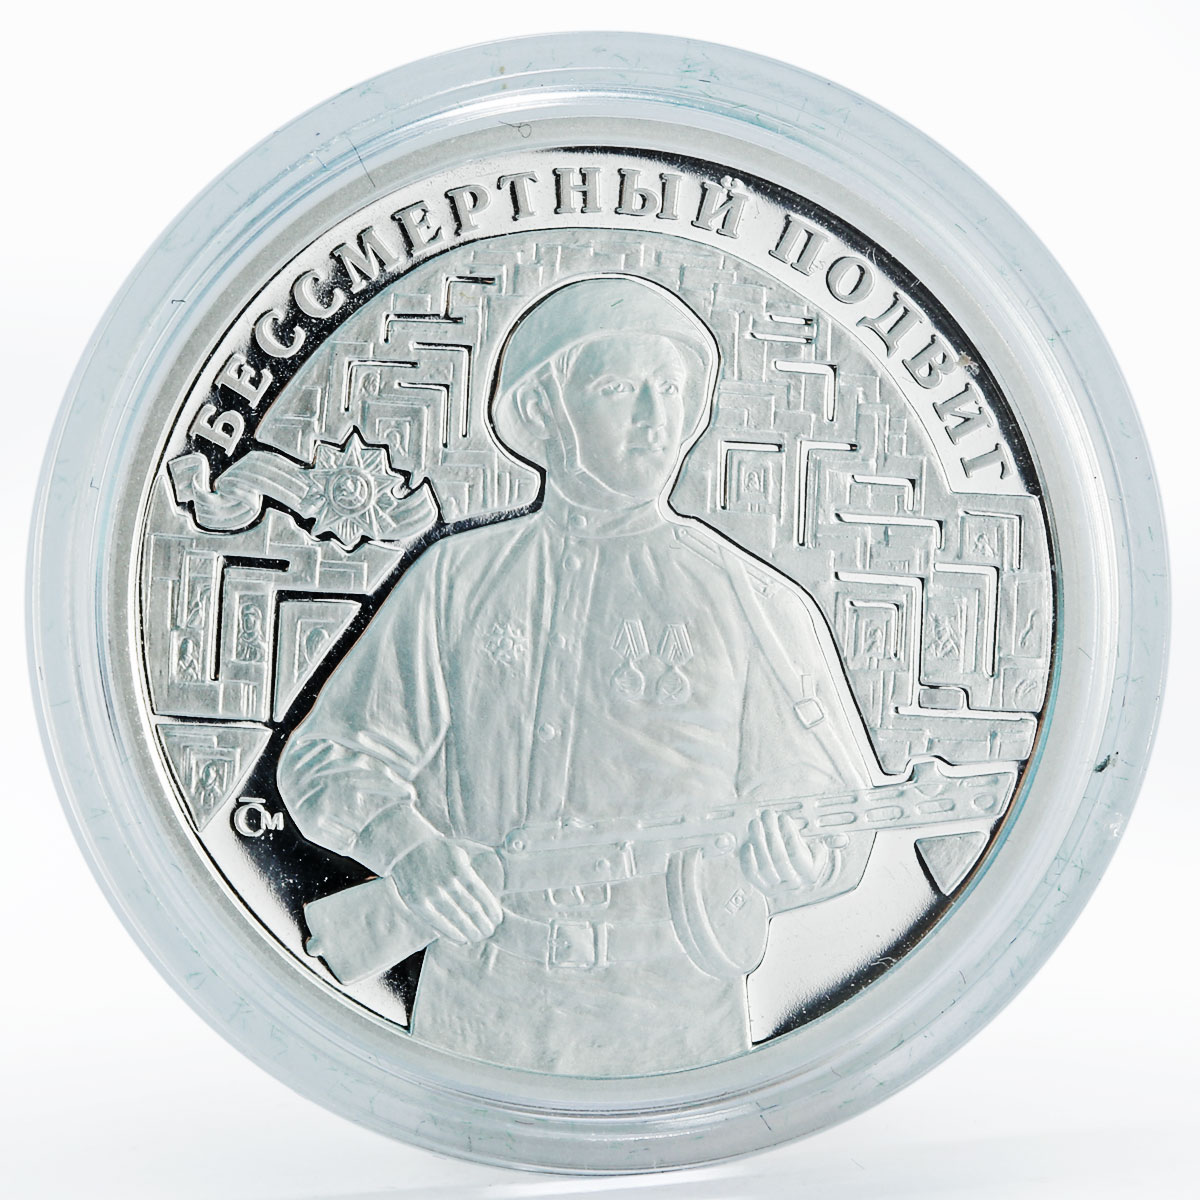 Cameroon 500 francs Immortal Feat soldier child salutes proof silver coin 2019